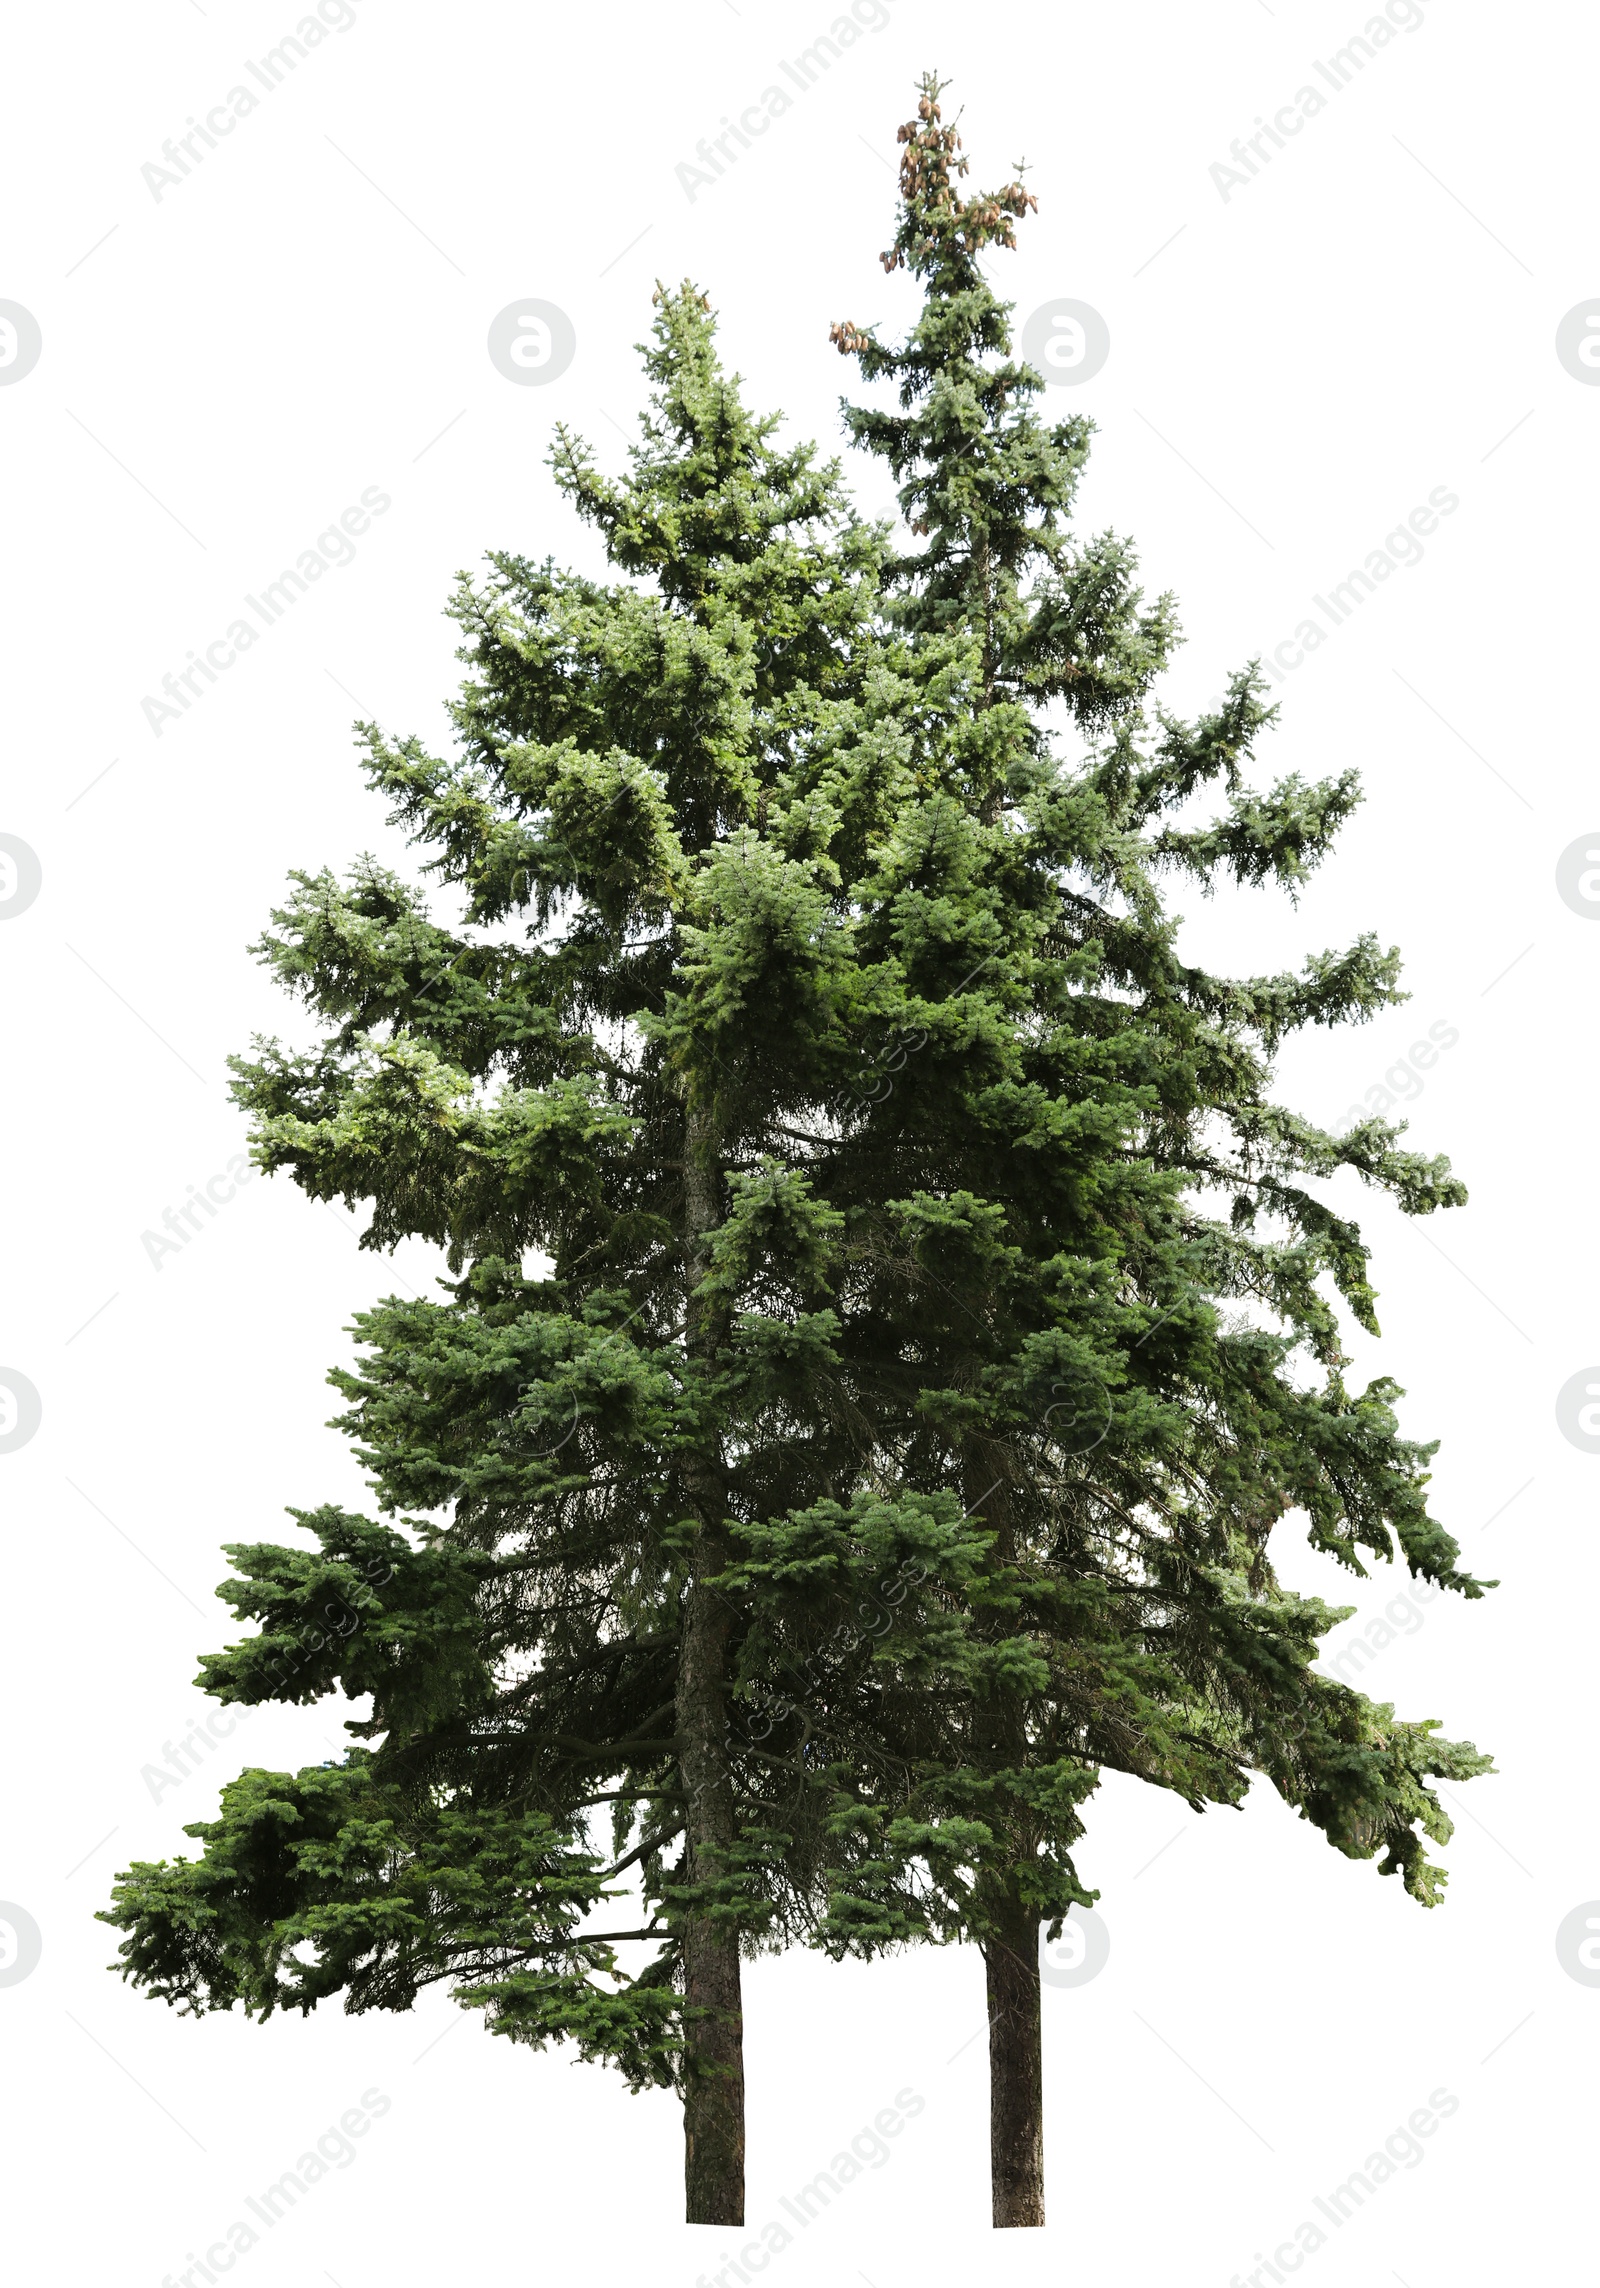 Image of Beautiful evergreen fir trees on white background